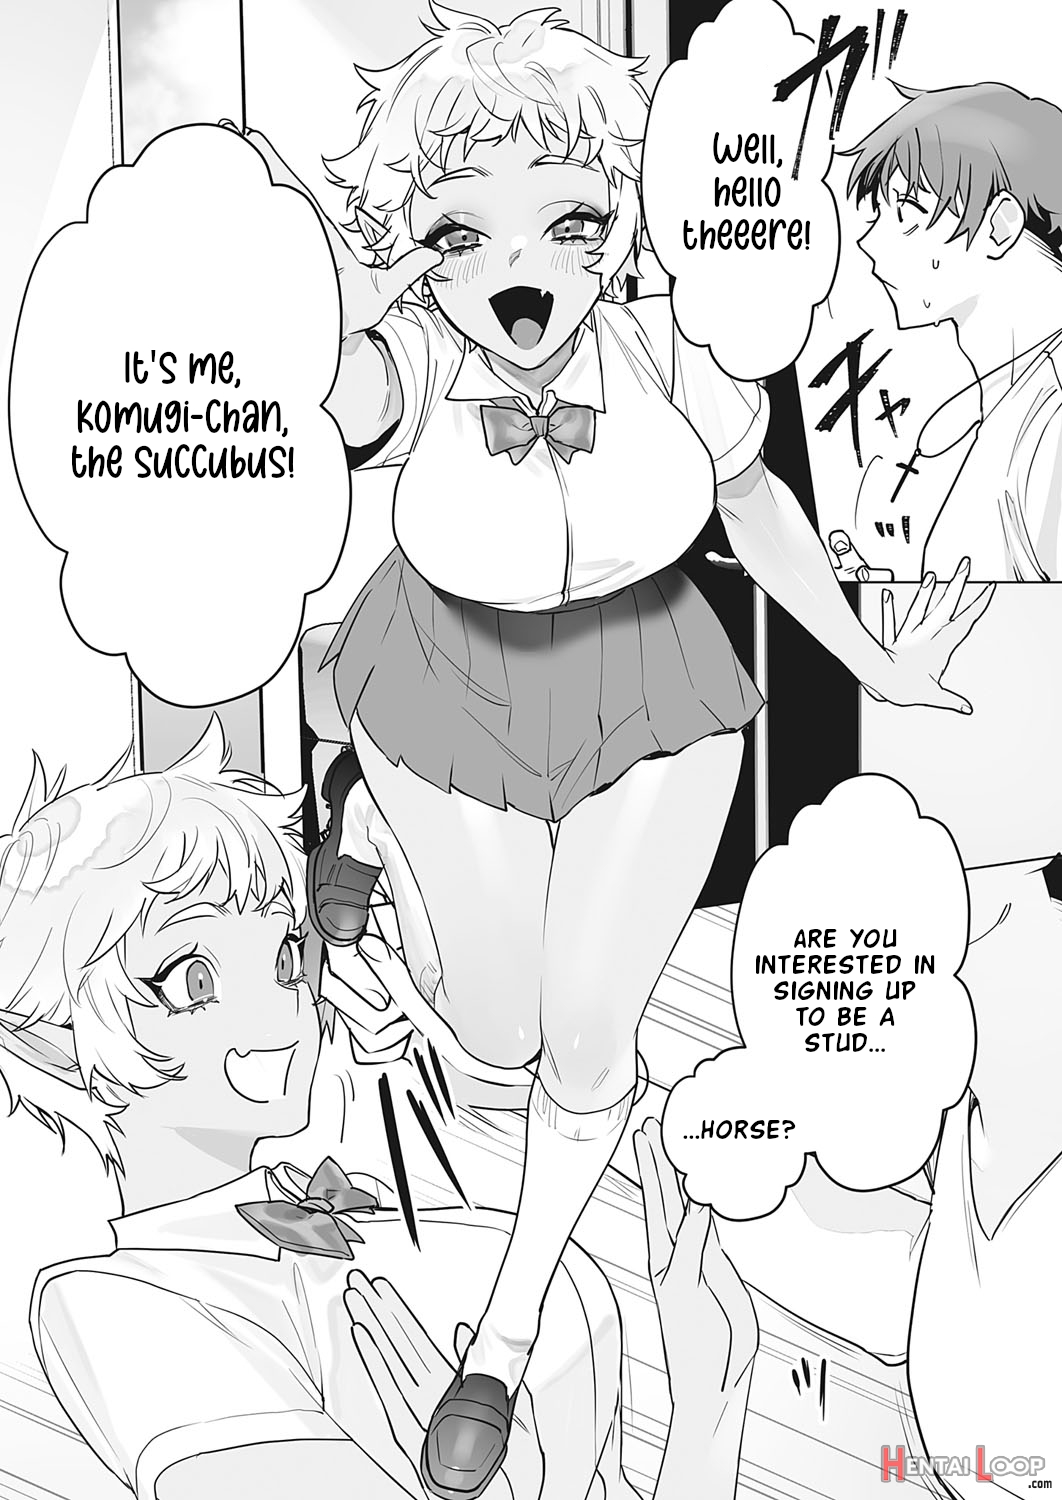 A Dance With Komugi-chan The Succubus page 3